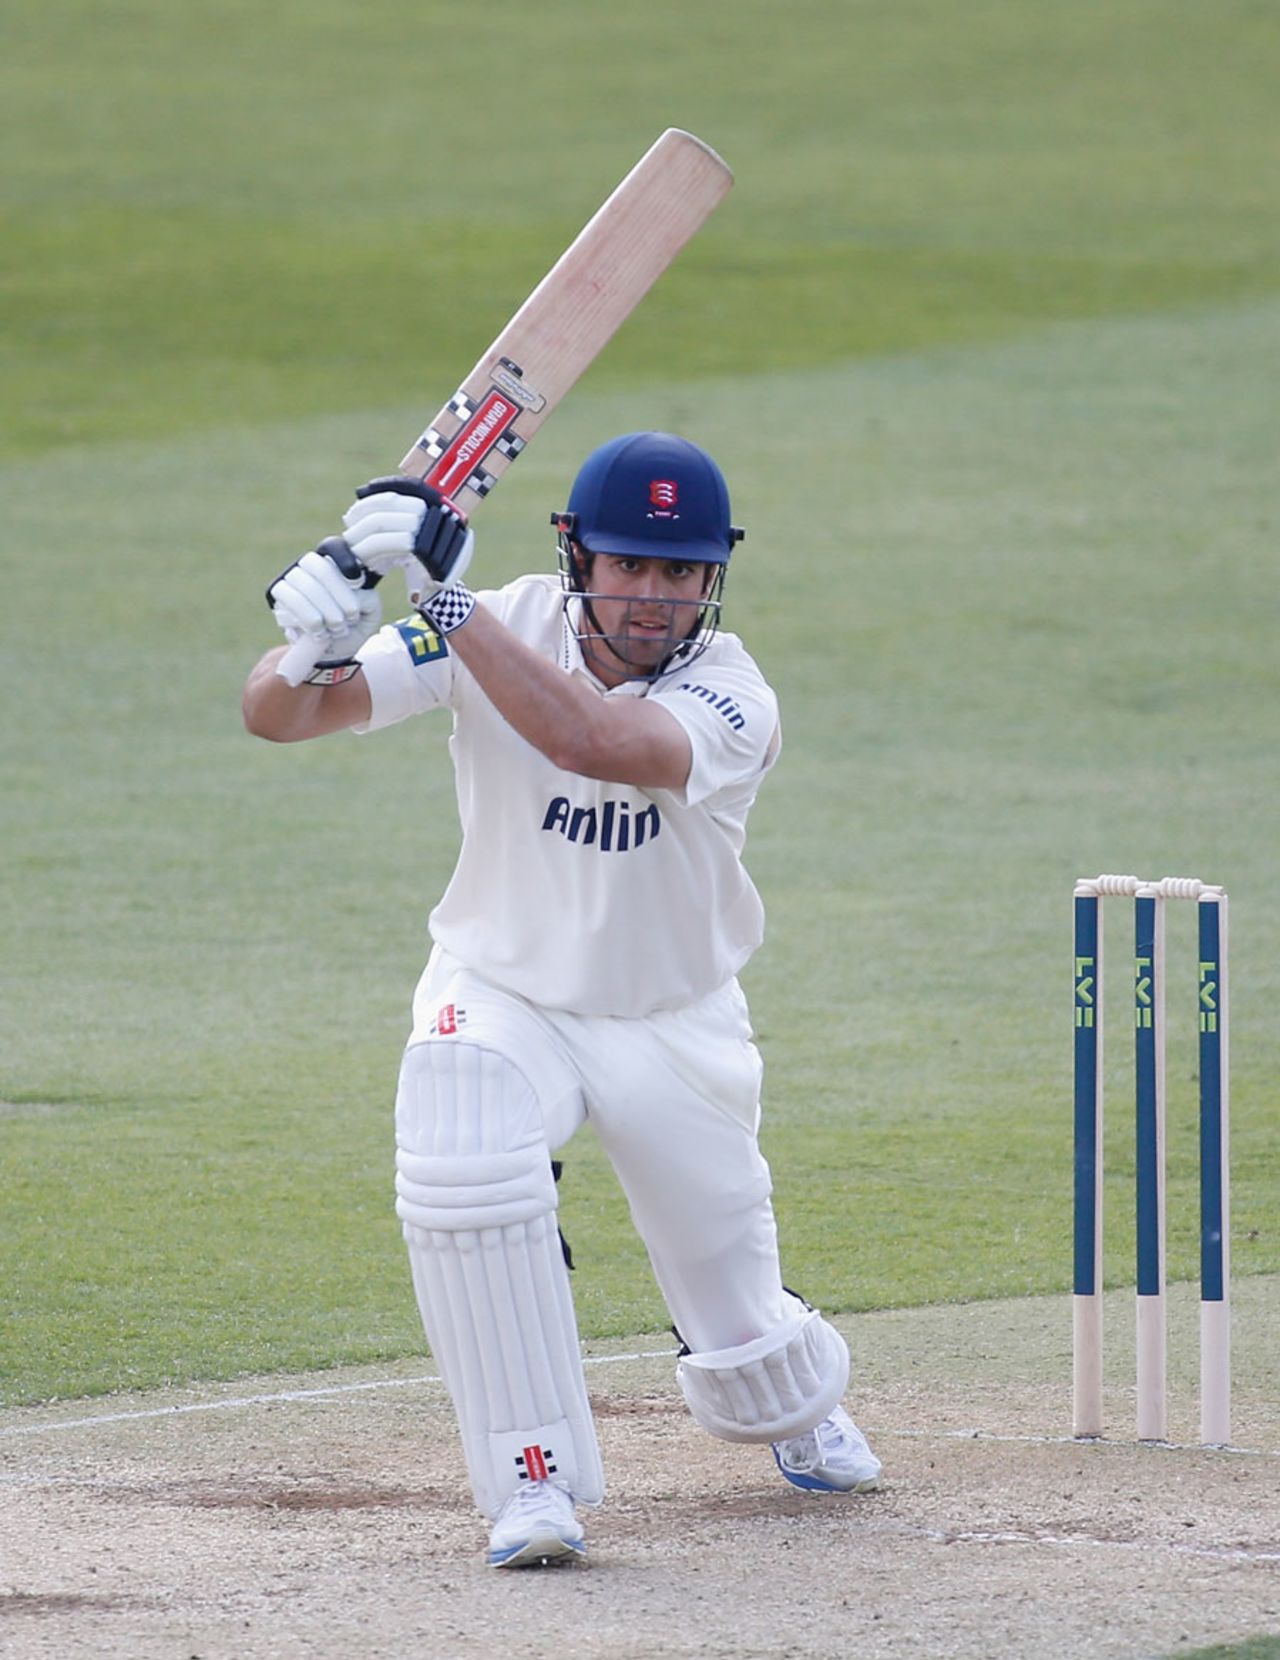 Alastair Cook made a century as Essex responded well, Essex v Derbyshire, County Championship Division Two, Chelmsford, 2nd day, April 14, 2014